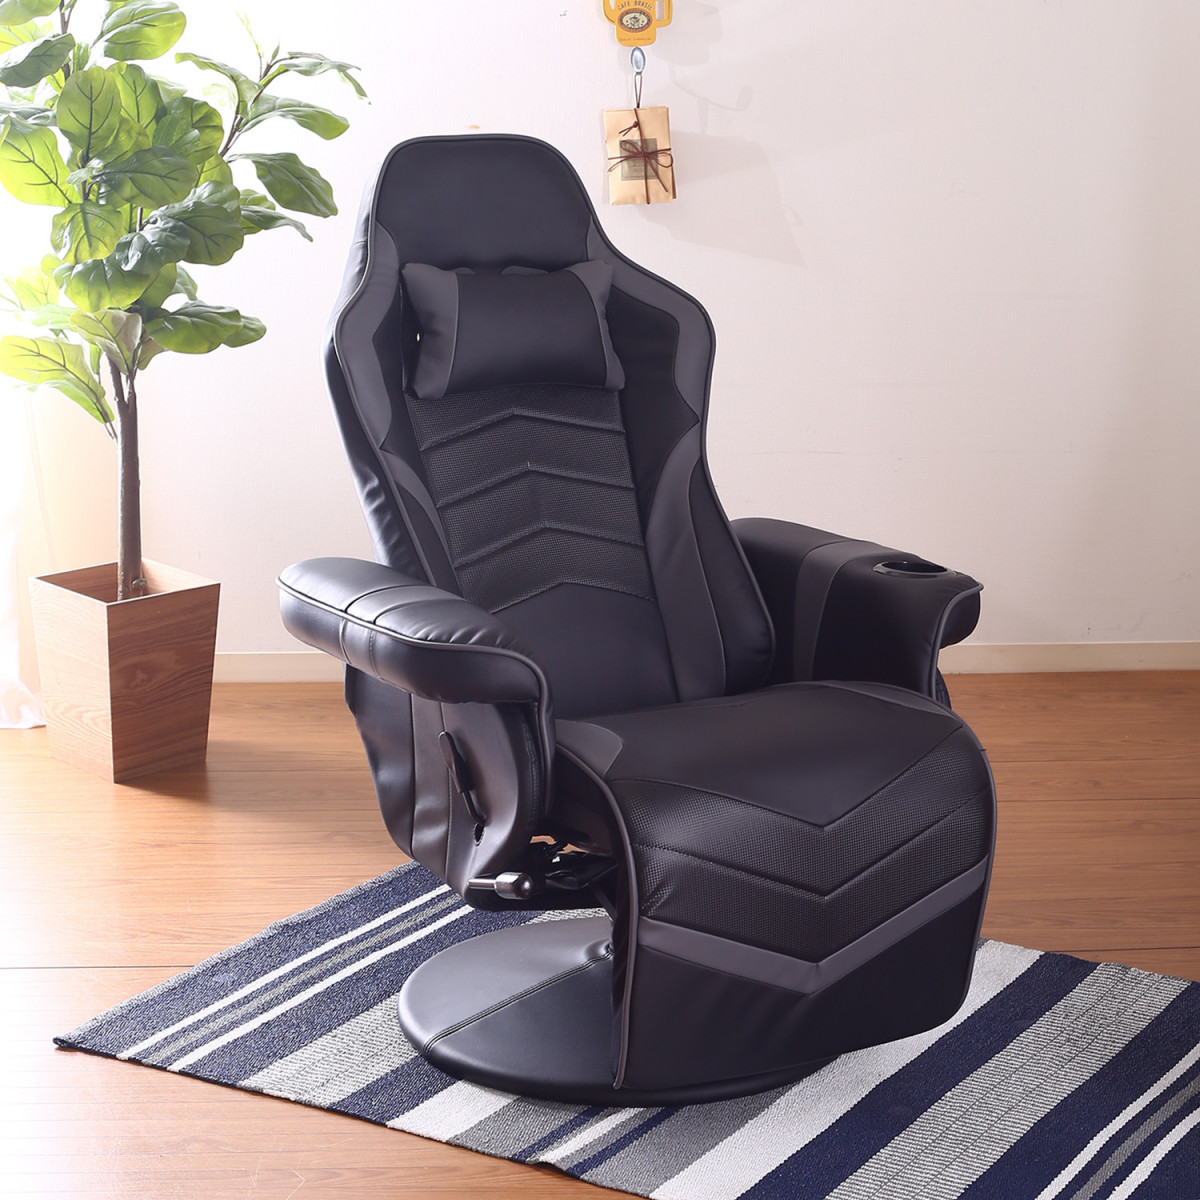  personal ge-ming chair foot less attaching black [ new goods ][ free shipping ]( Hokkaido Okinawa remote island postage separately )